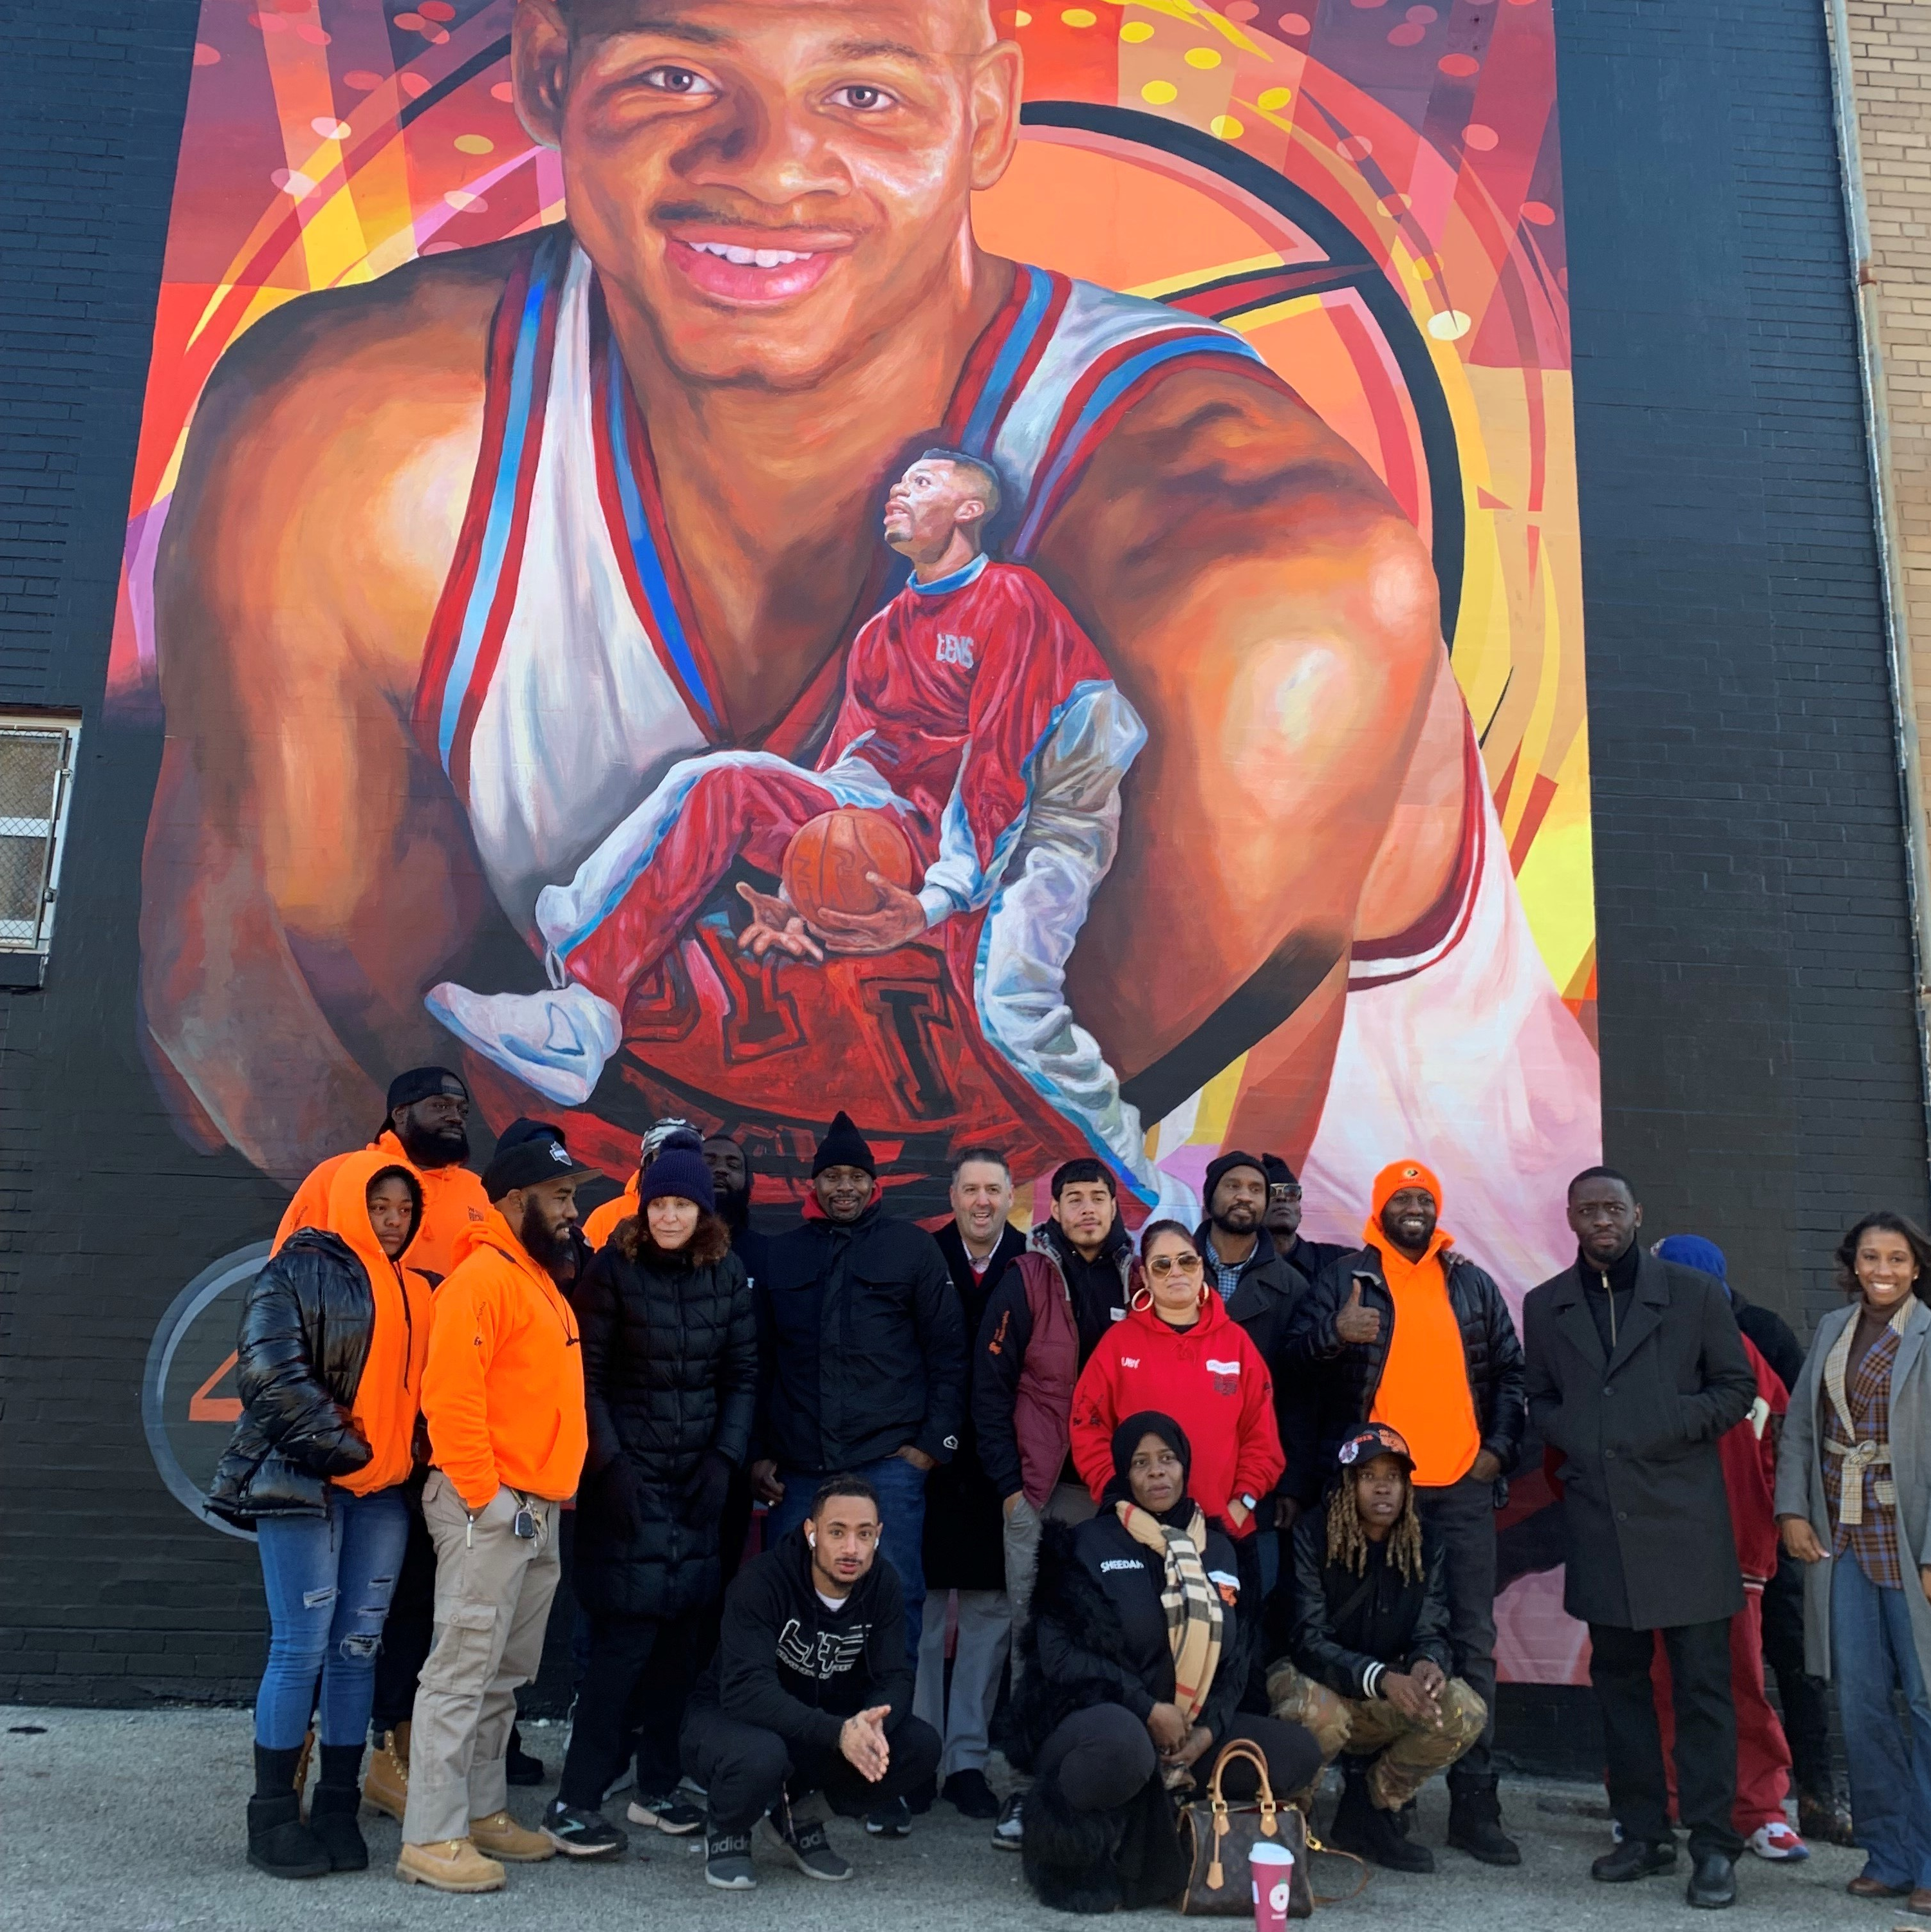 New Hank Gathers mural unveiled at North Philly rec center